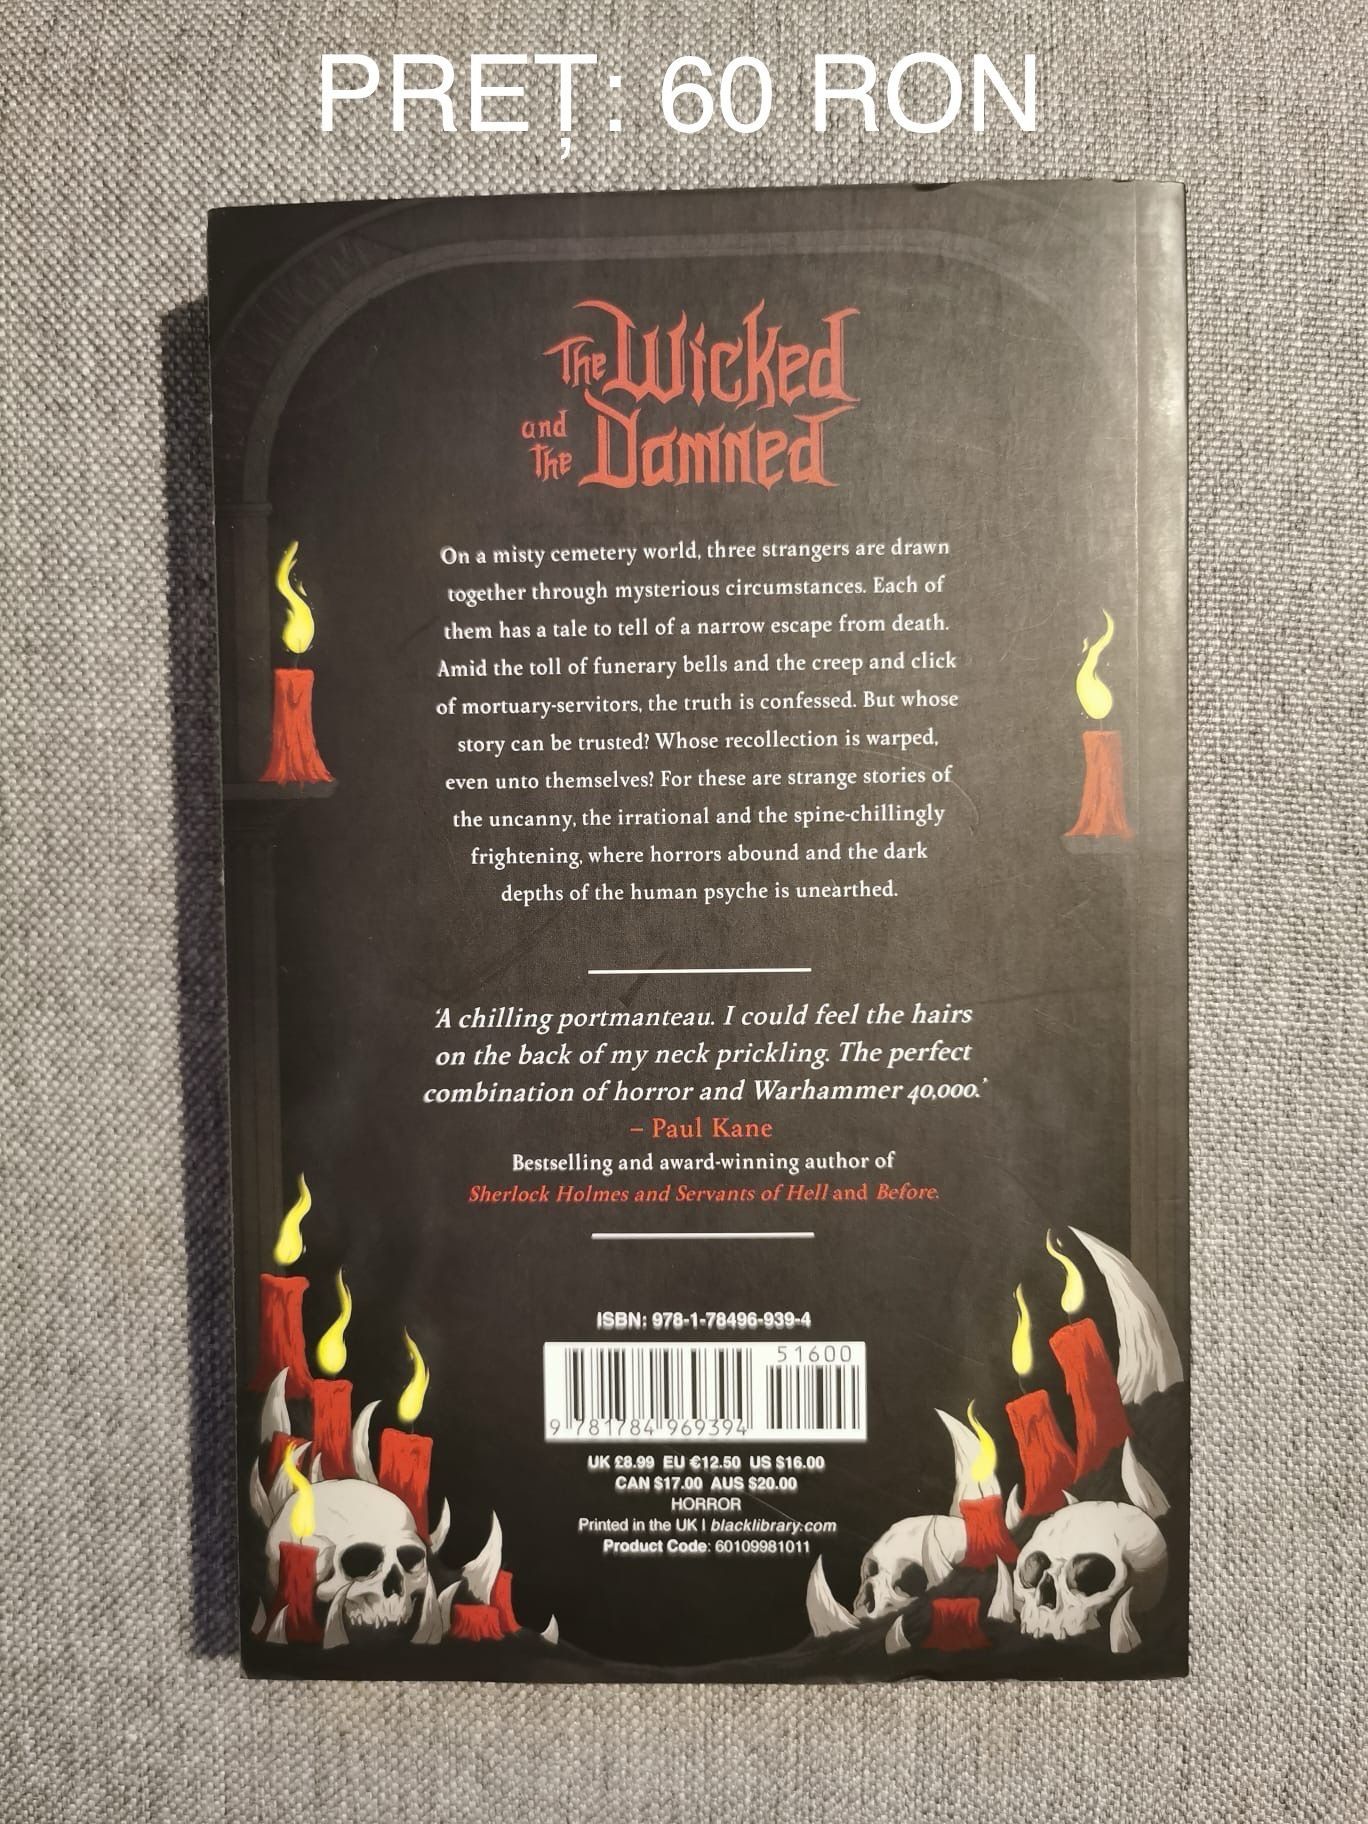 The wicked and the damned